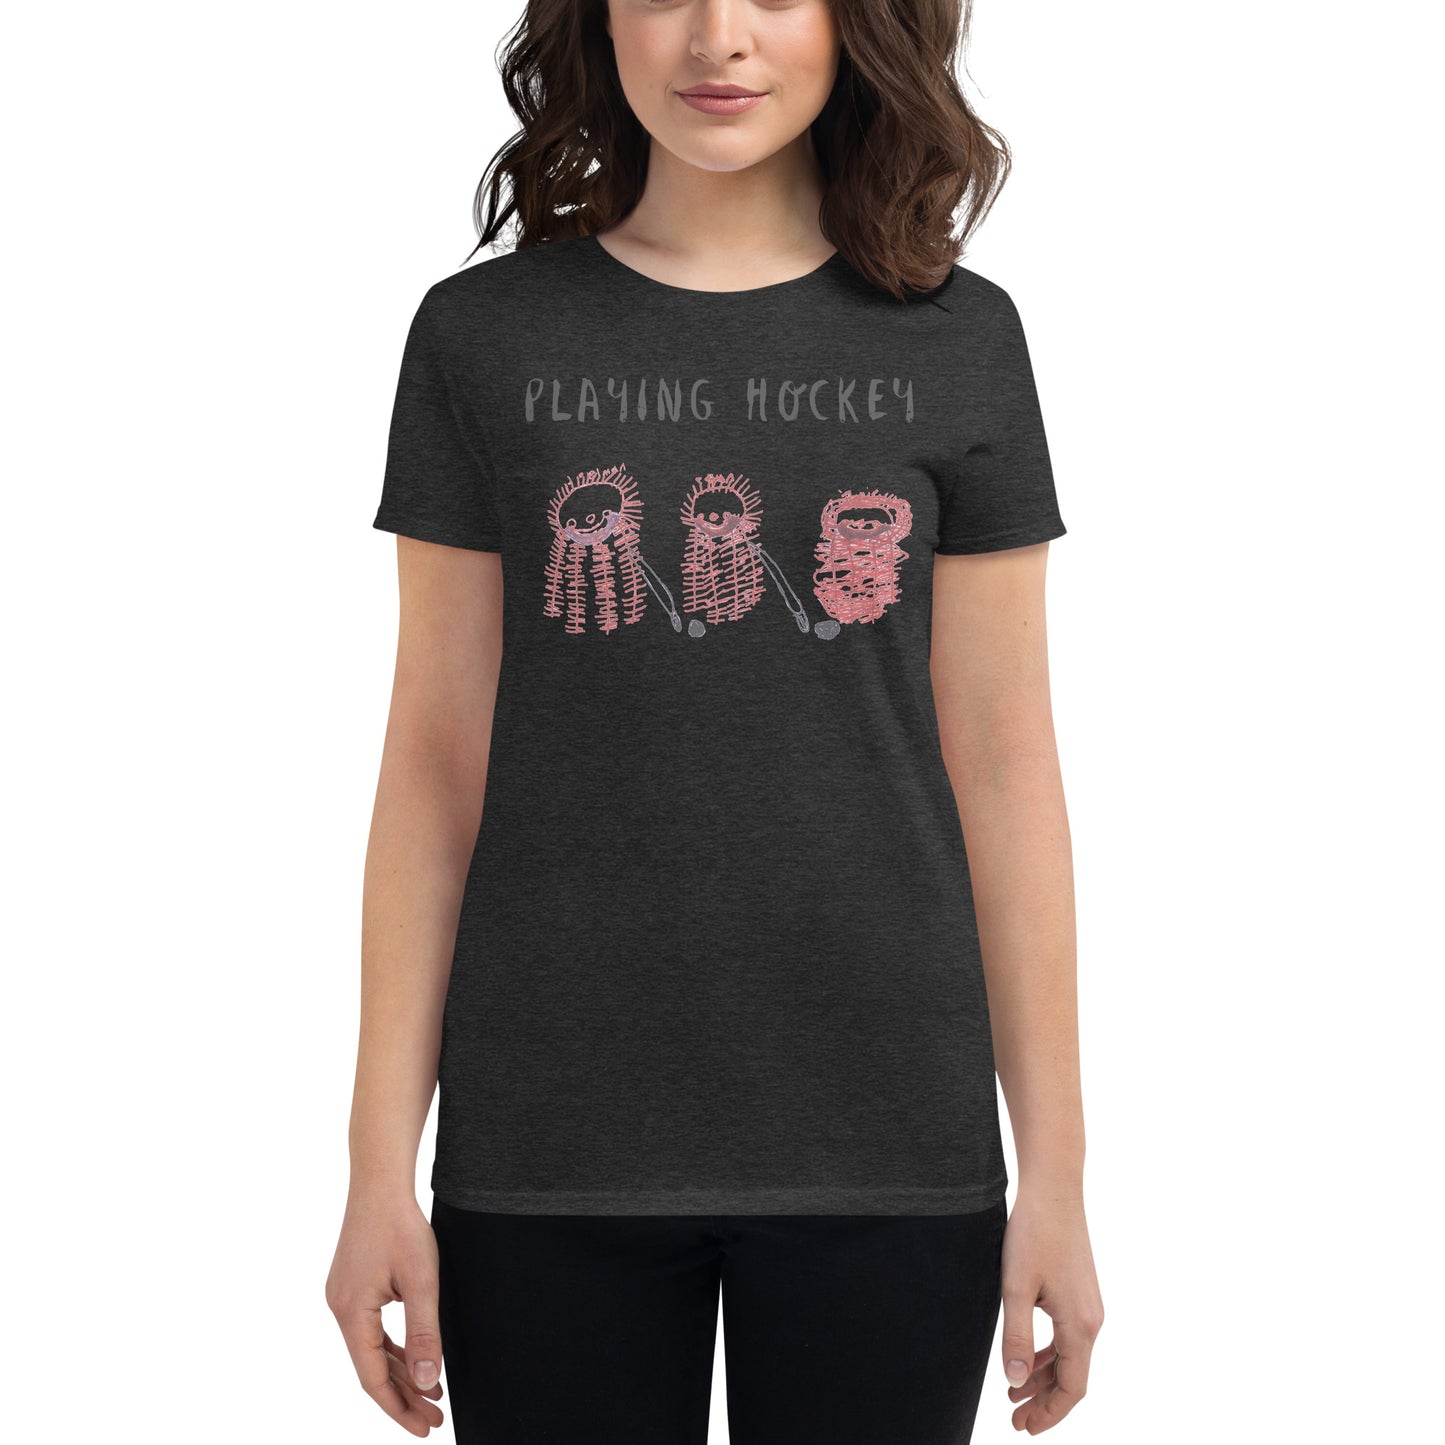 Women's tee - "Playing Hockey with the Condors"